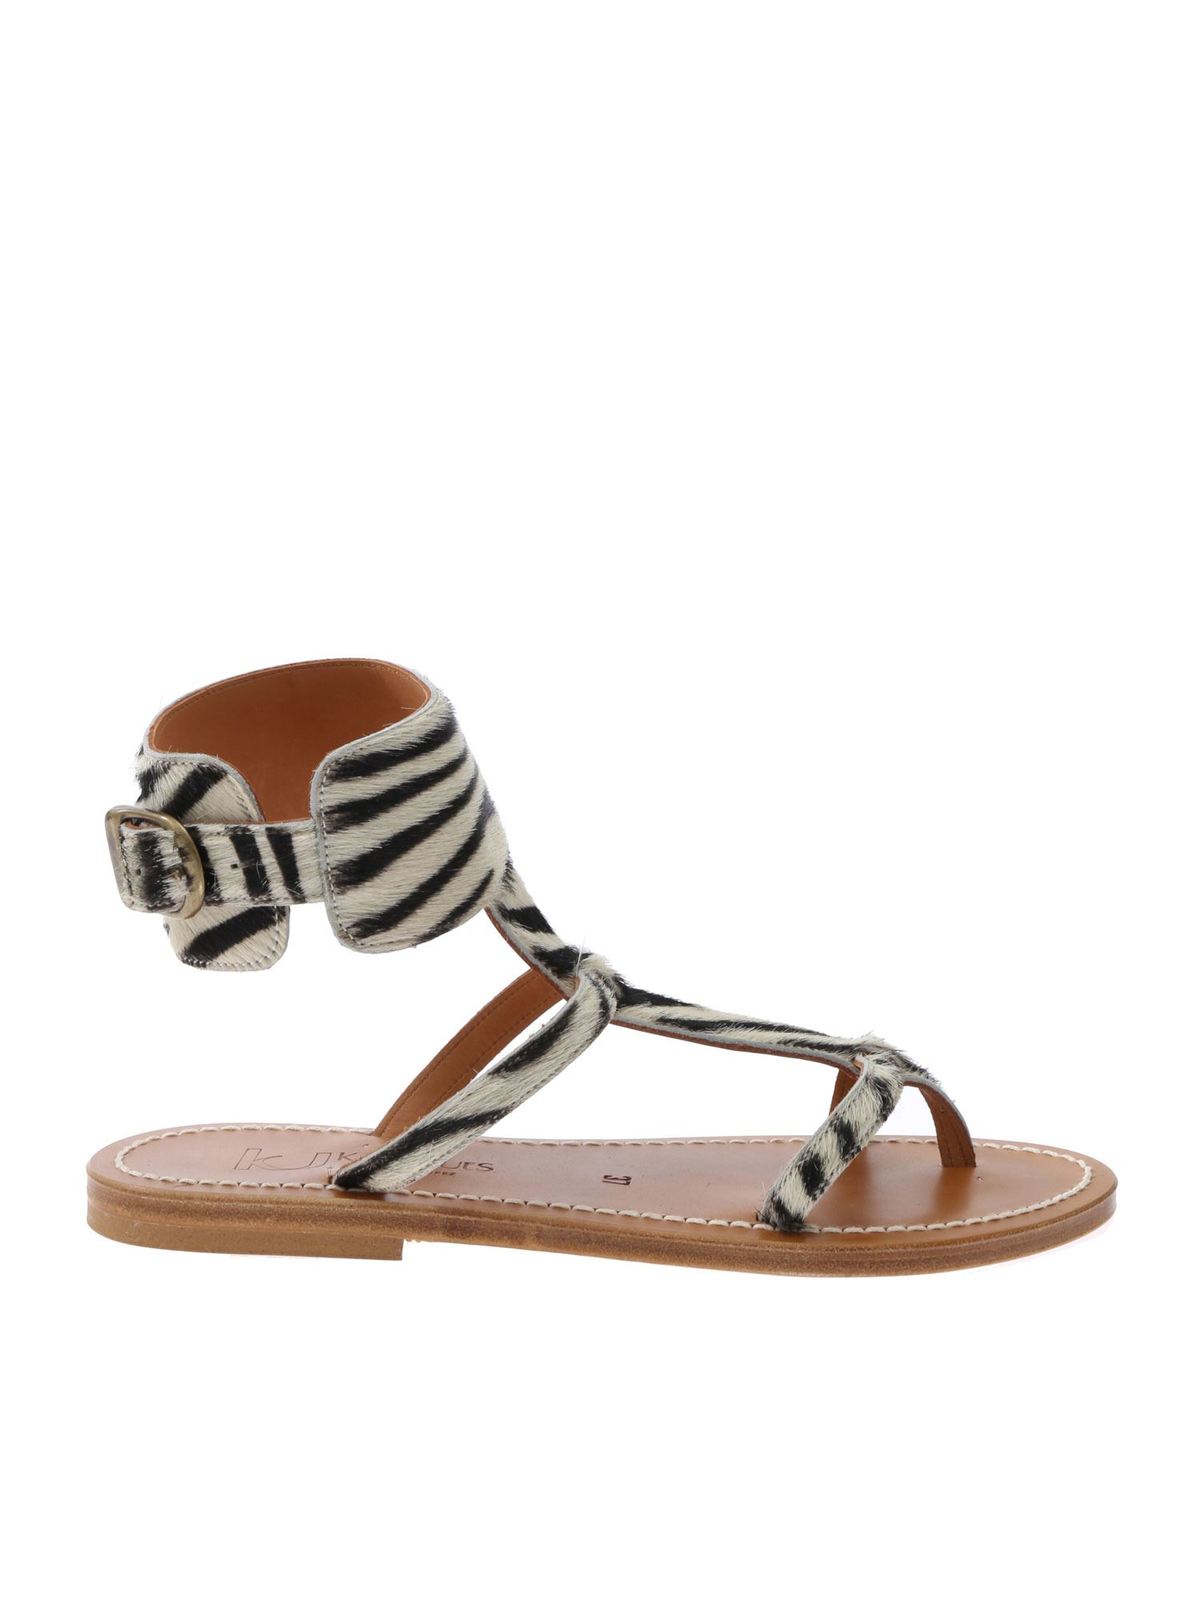 KJACQUES CARAVELLE SANDALS IN STRIPED CALFHAIR